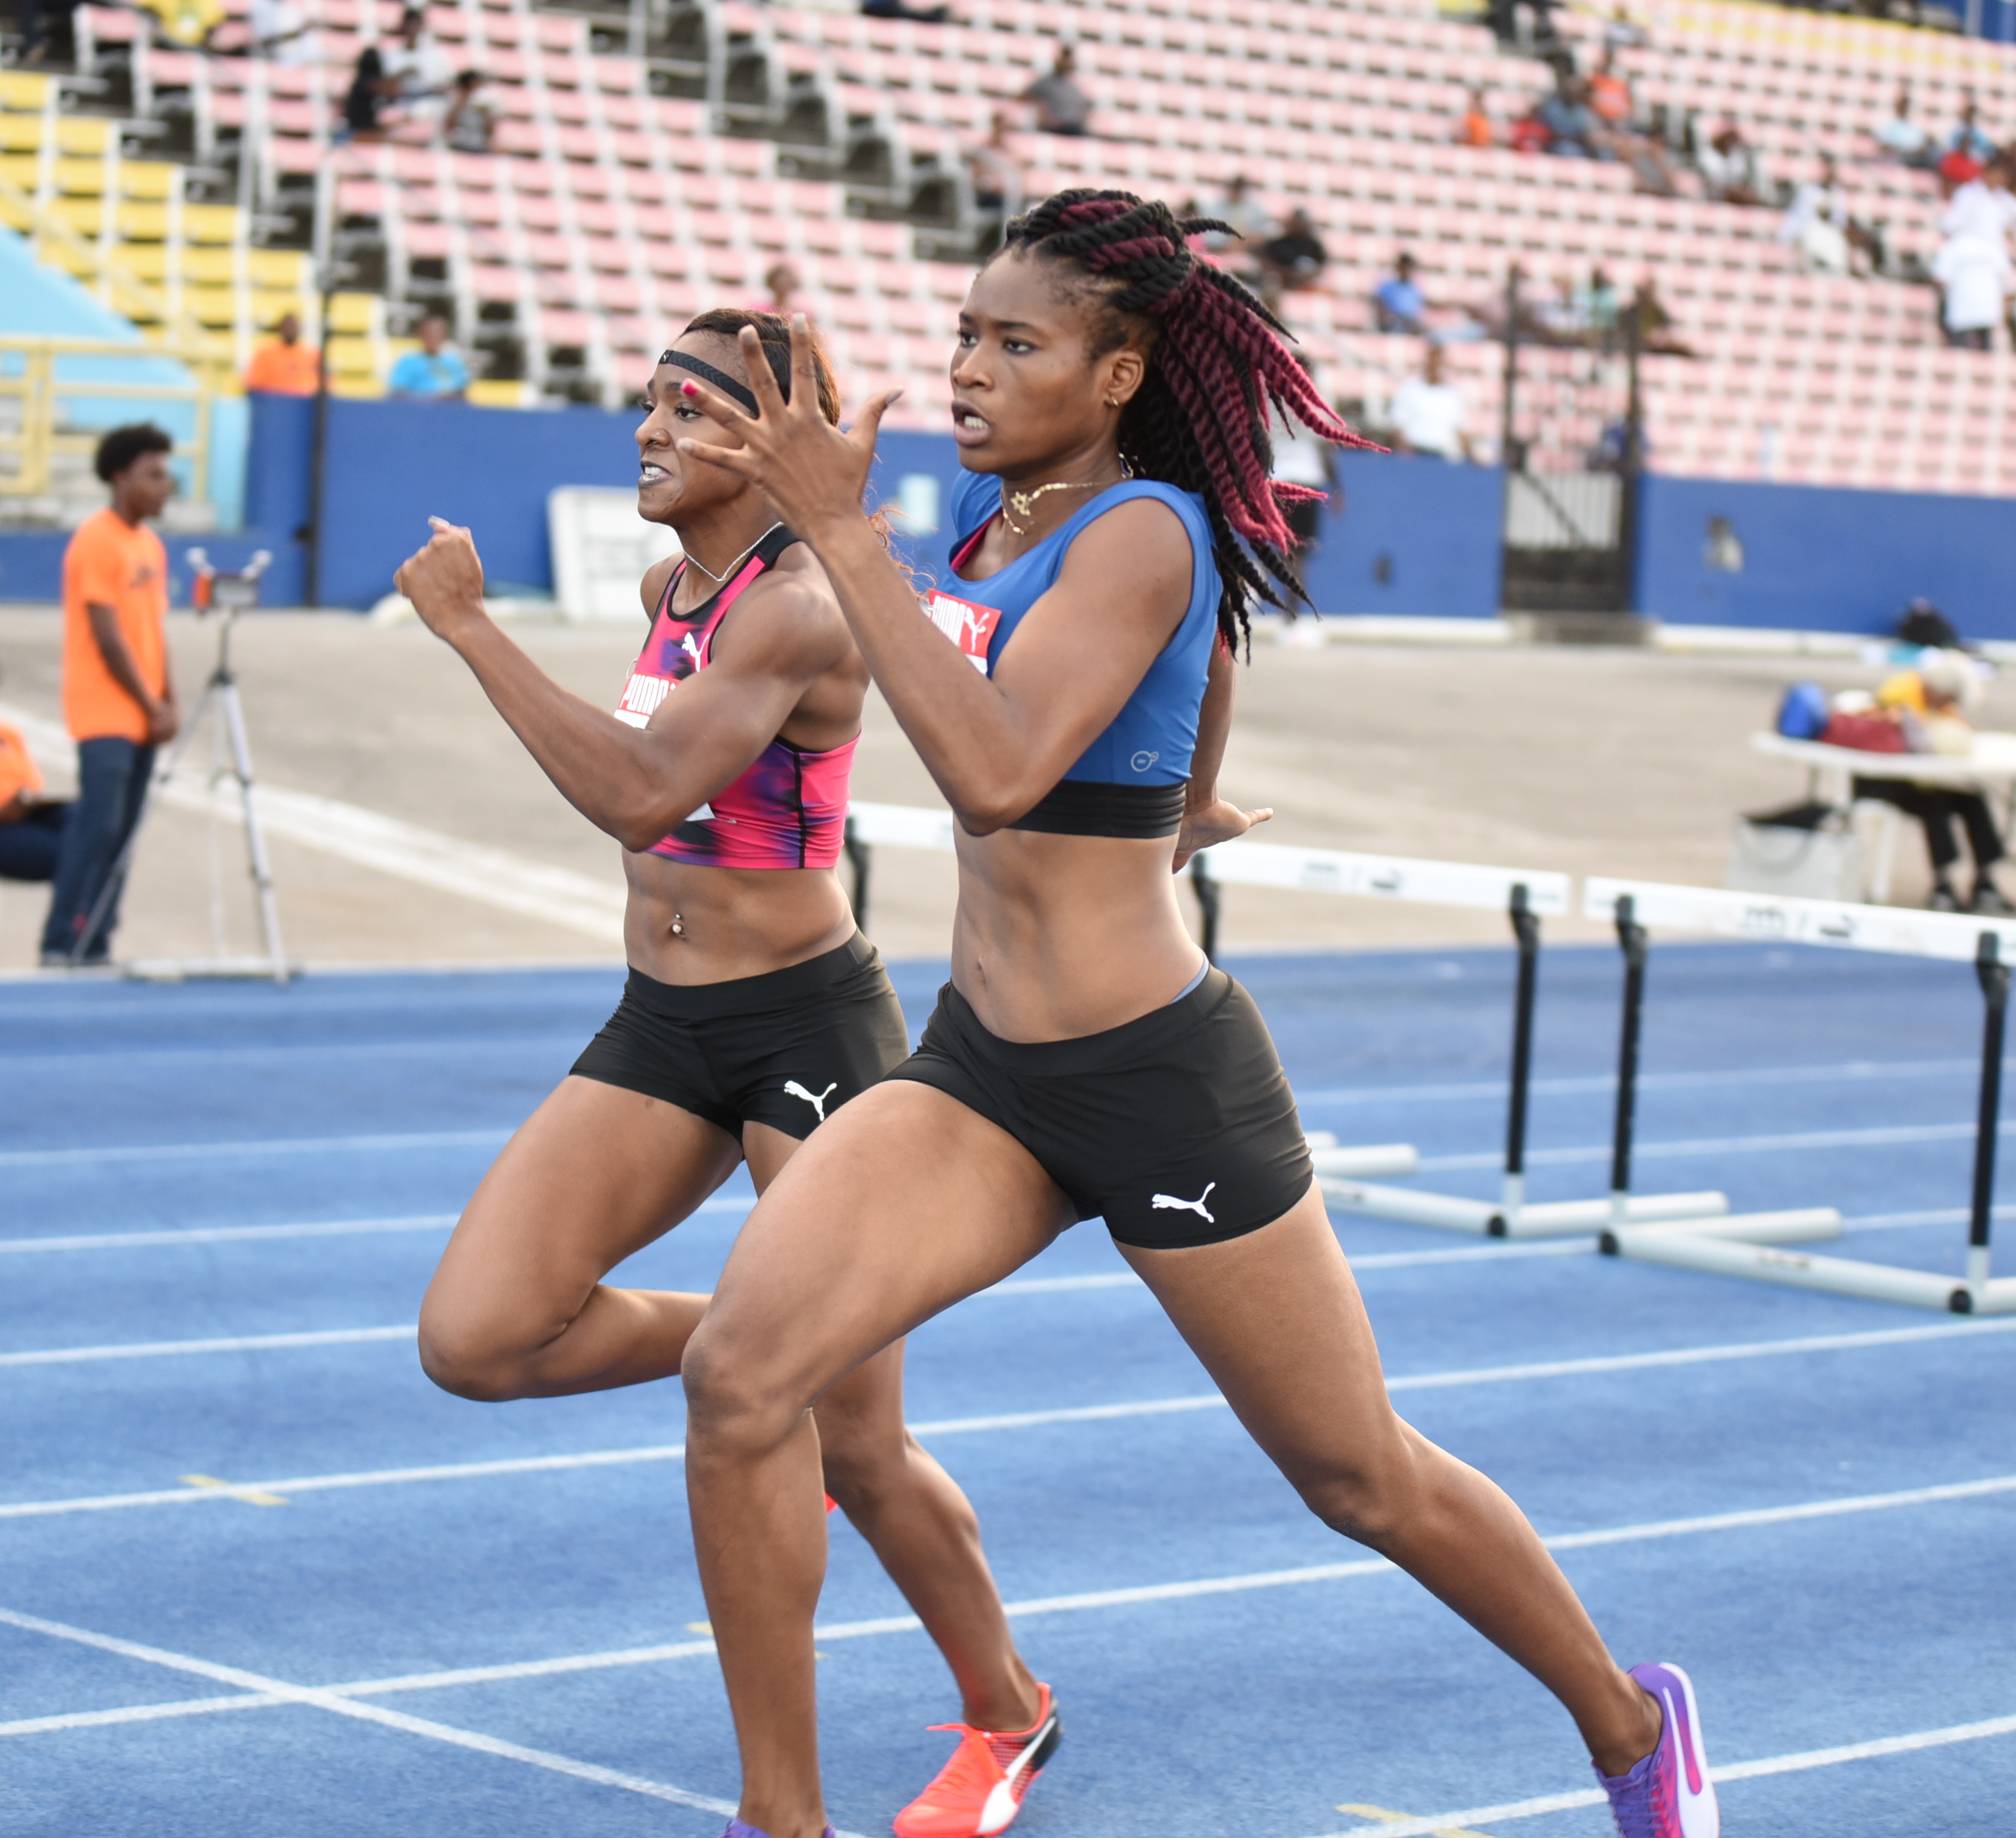 Ristananna Tracey joins Hurdle Mechanic group